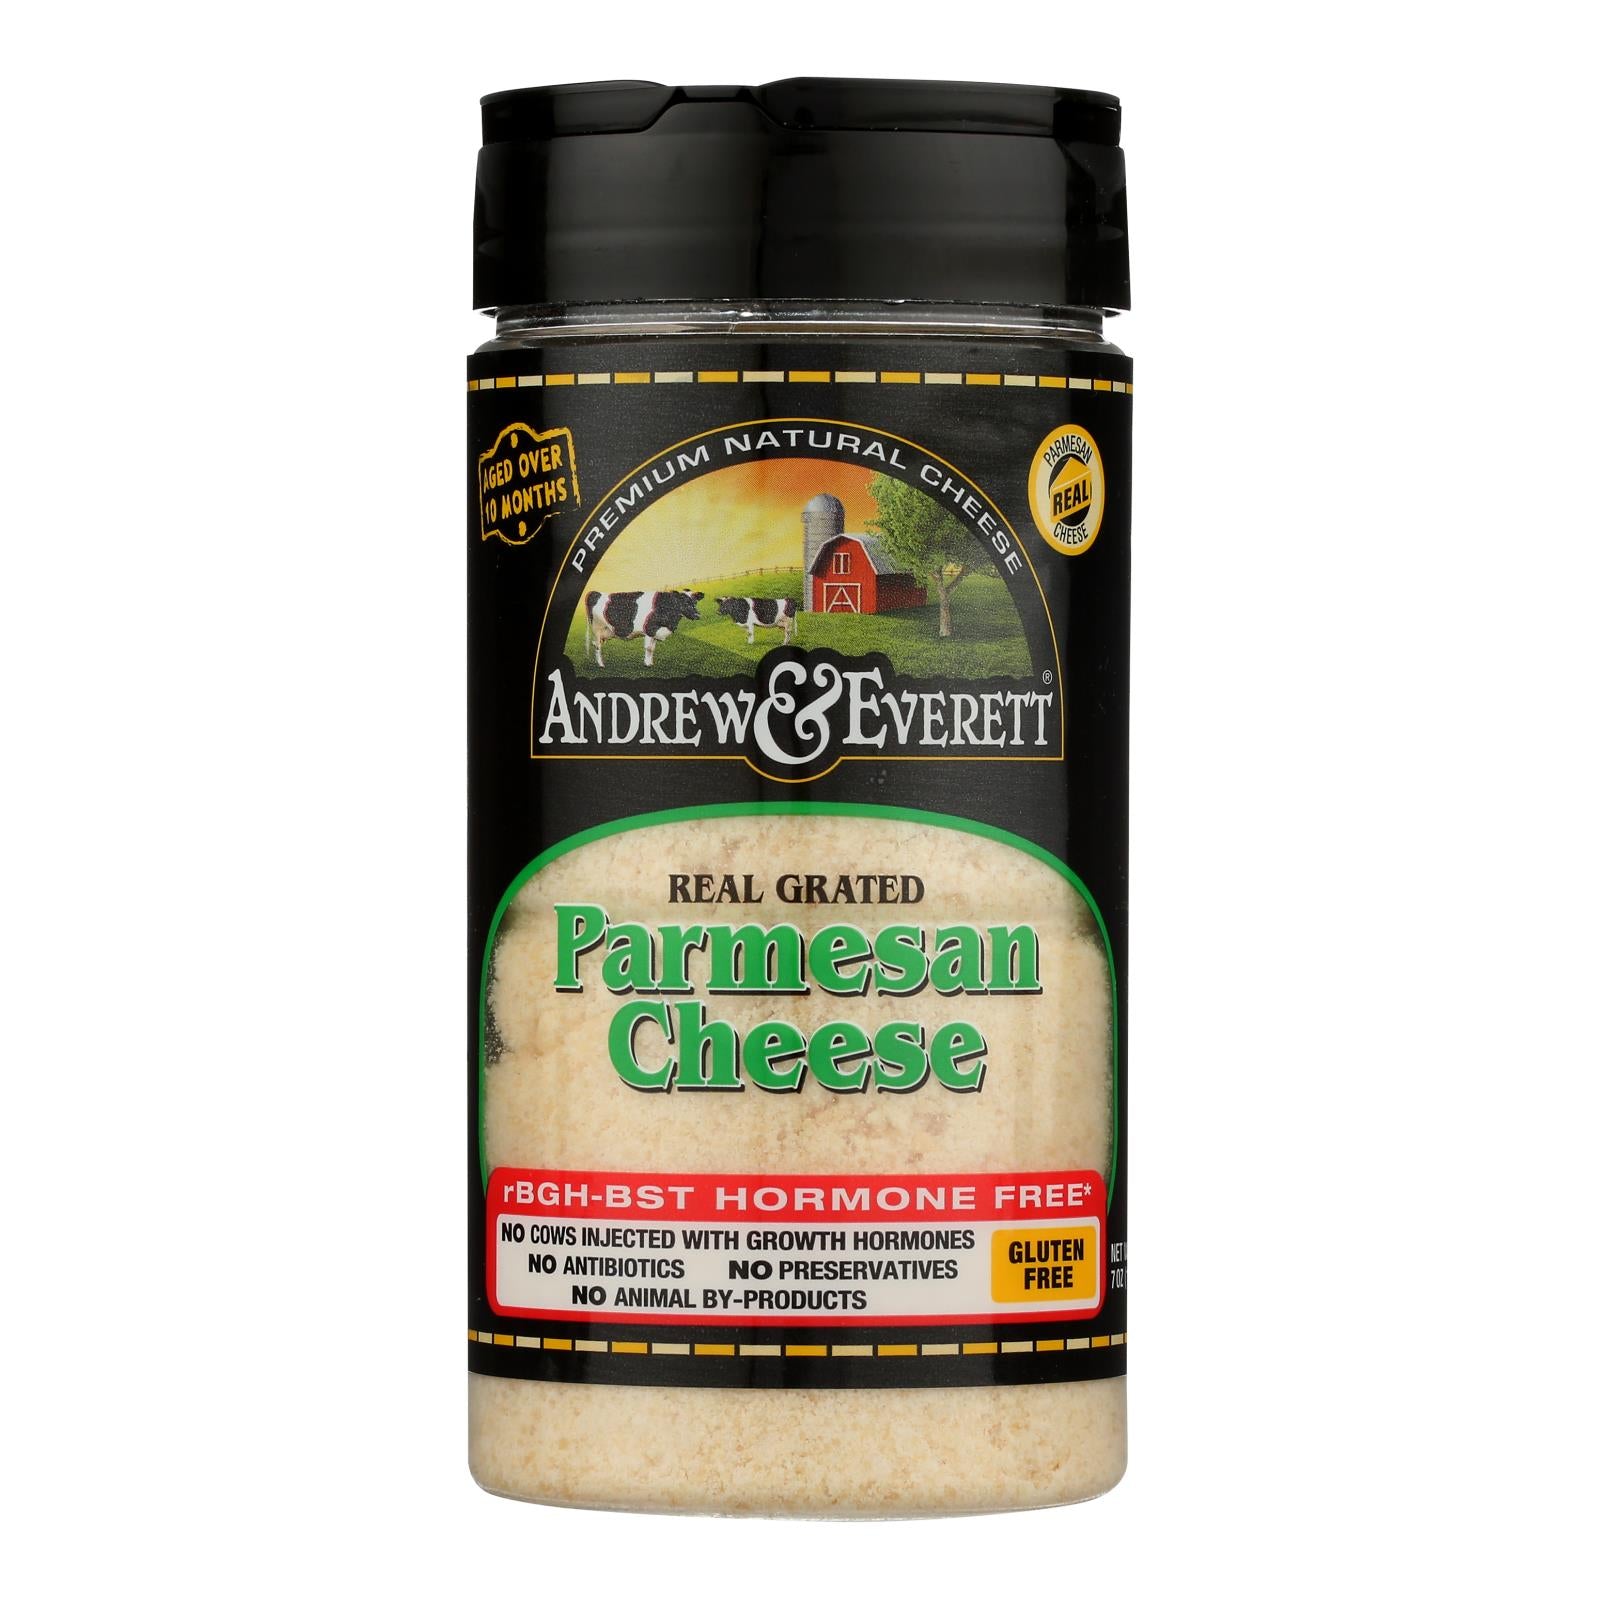 Andrew and Everett - Parmesan Cheese - Grated - Case of 6 - 7 oz.